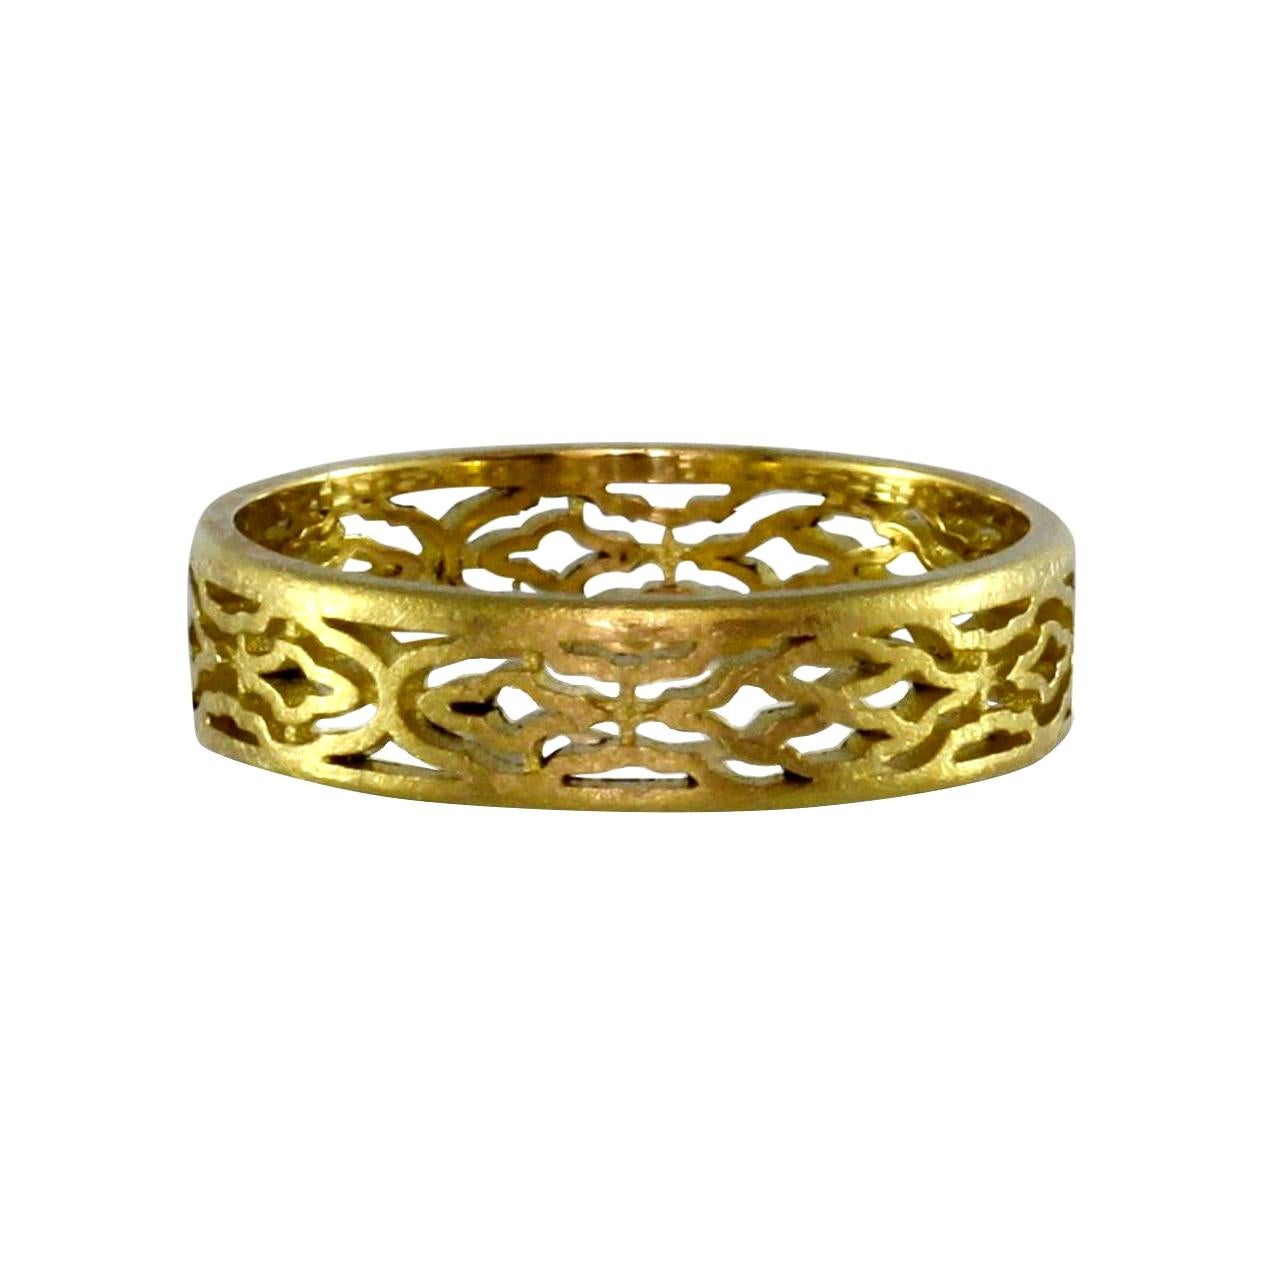 Luca Jouel Arabesque Patterned Ring in Yellow Gold For Sale